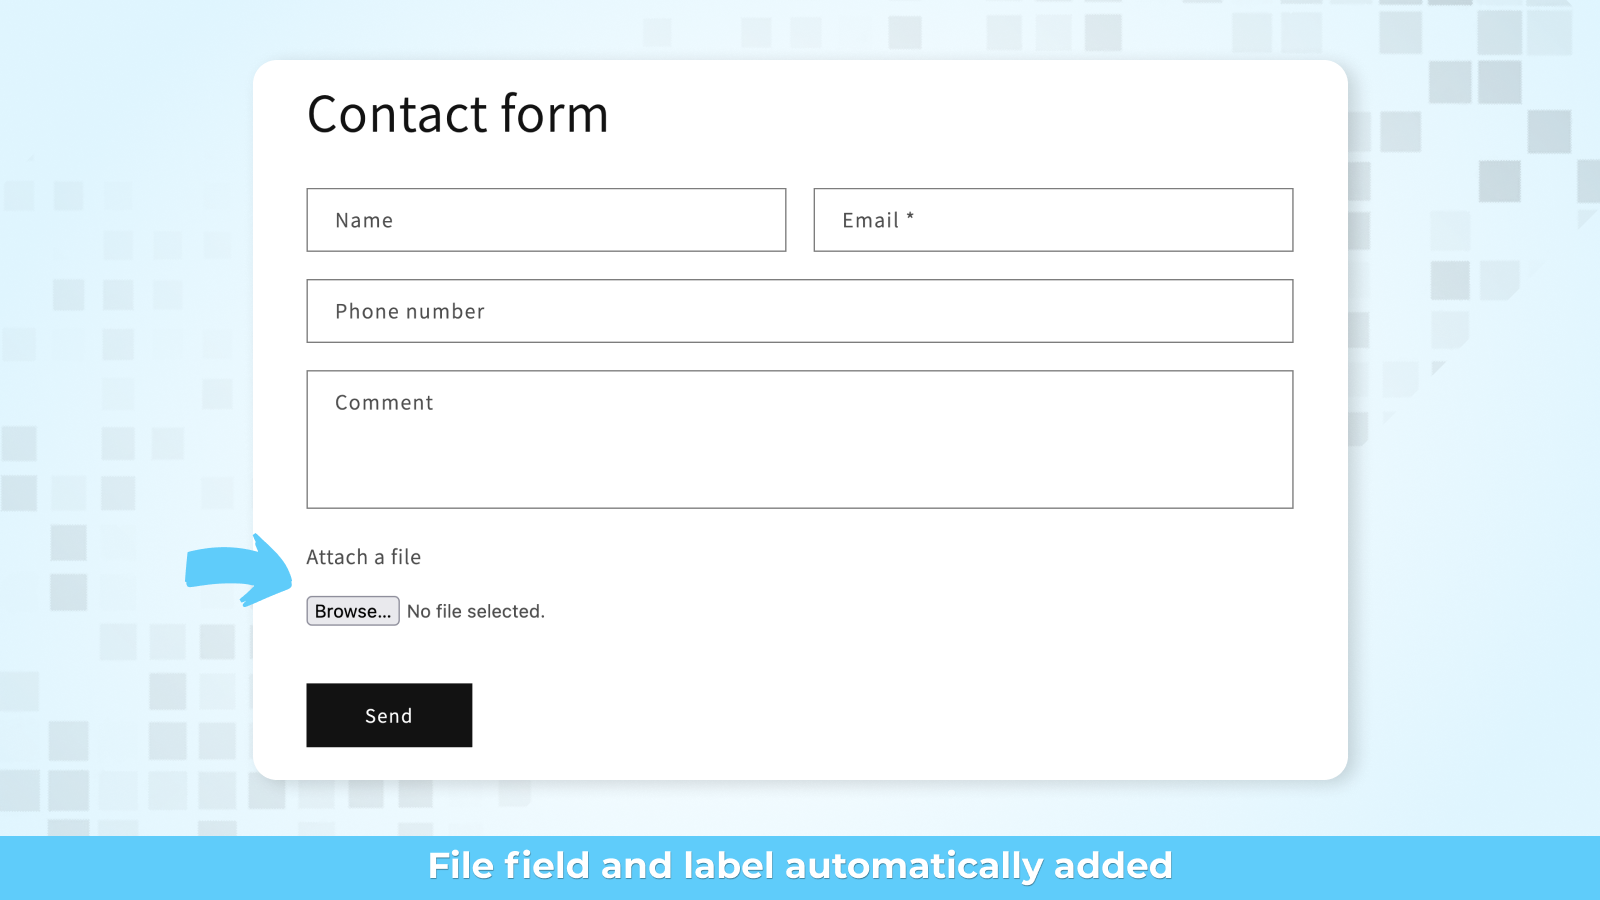 The My File field field and label is automatically added